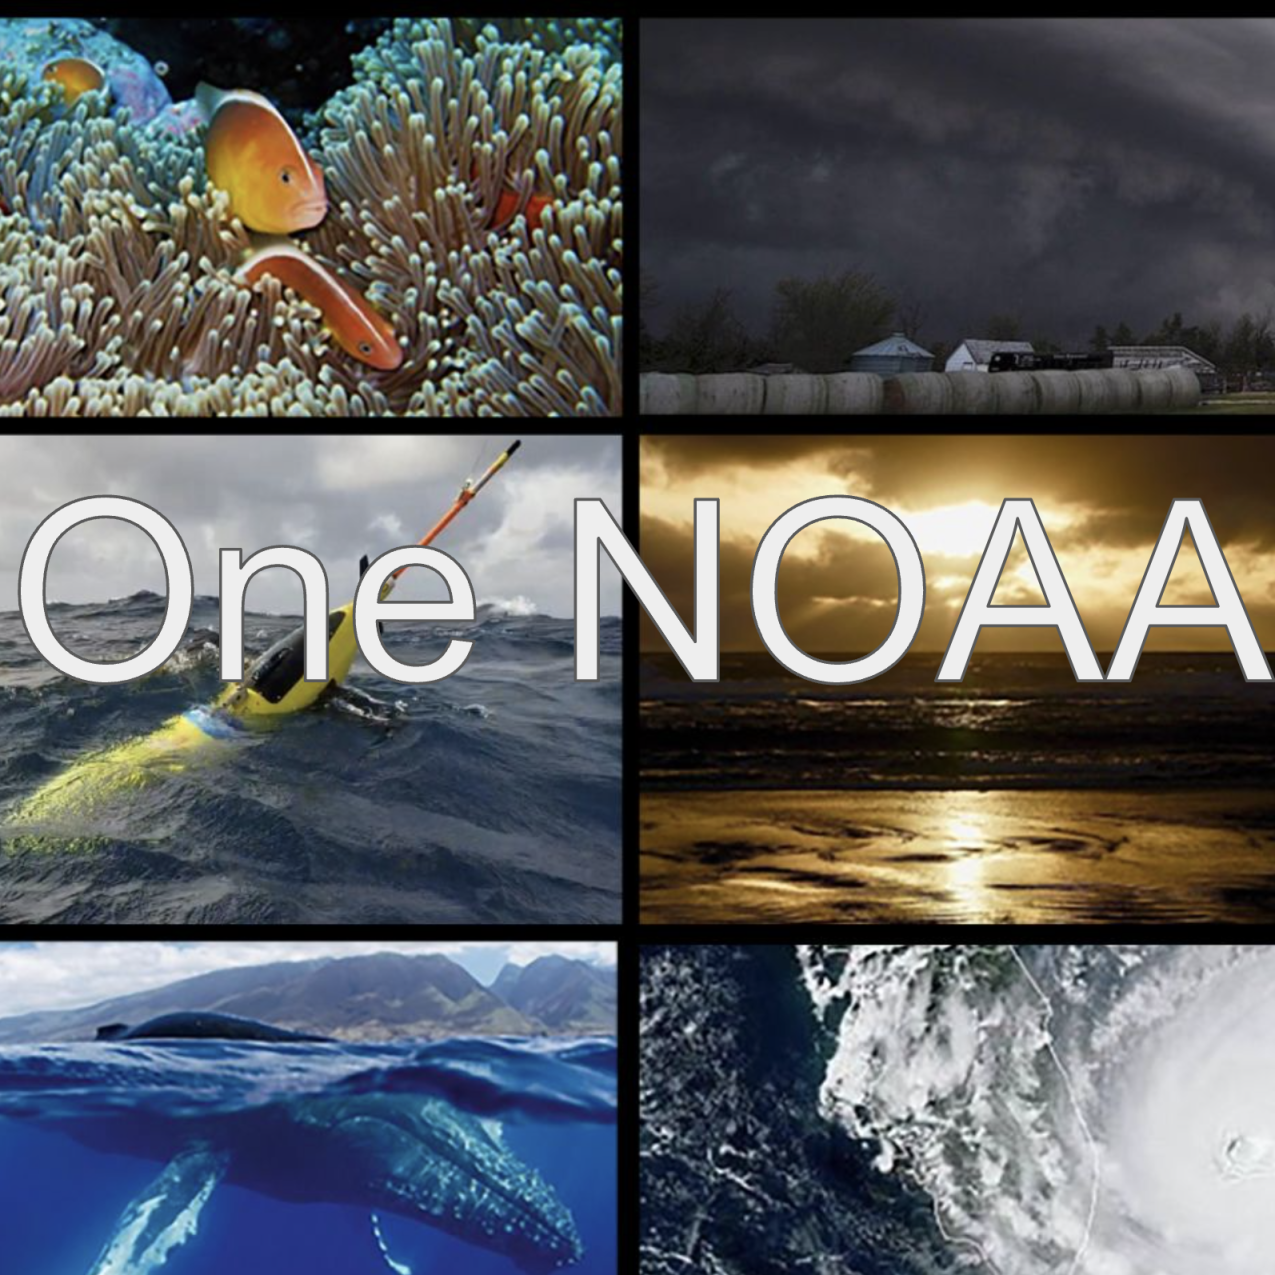 A grid of photos featuring NOAA-related topics including fish, storms, weather balloons, a whale, a hurricane, a NOAA ship, sea turtles, a buoy, and a sandy beach. Text: One NOAA, One Earth.